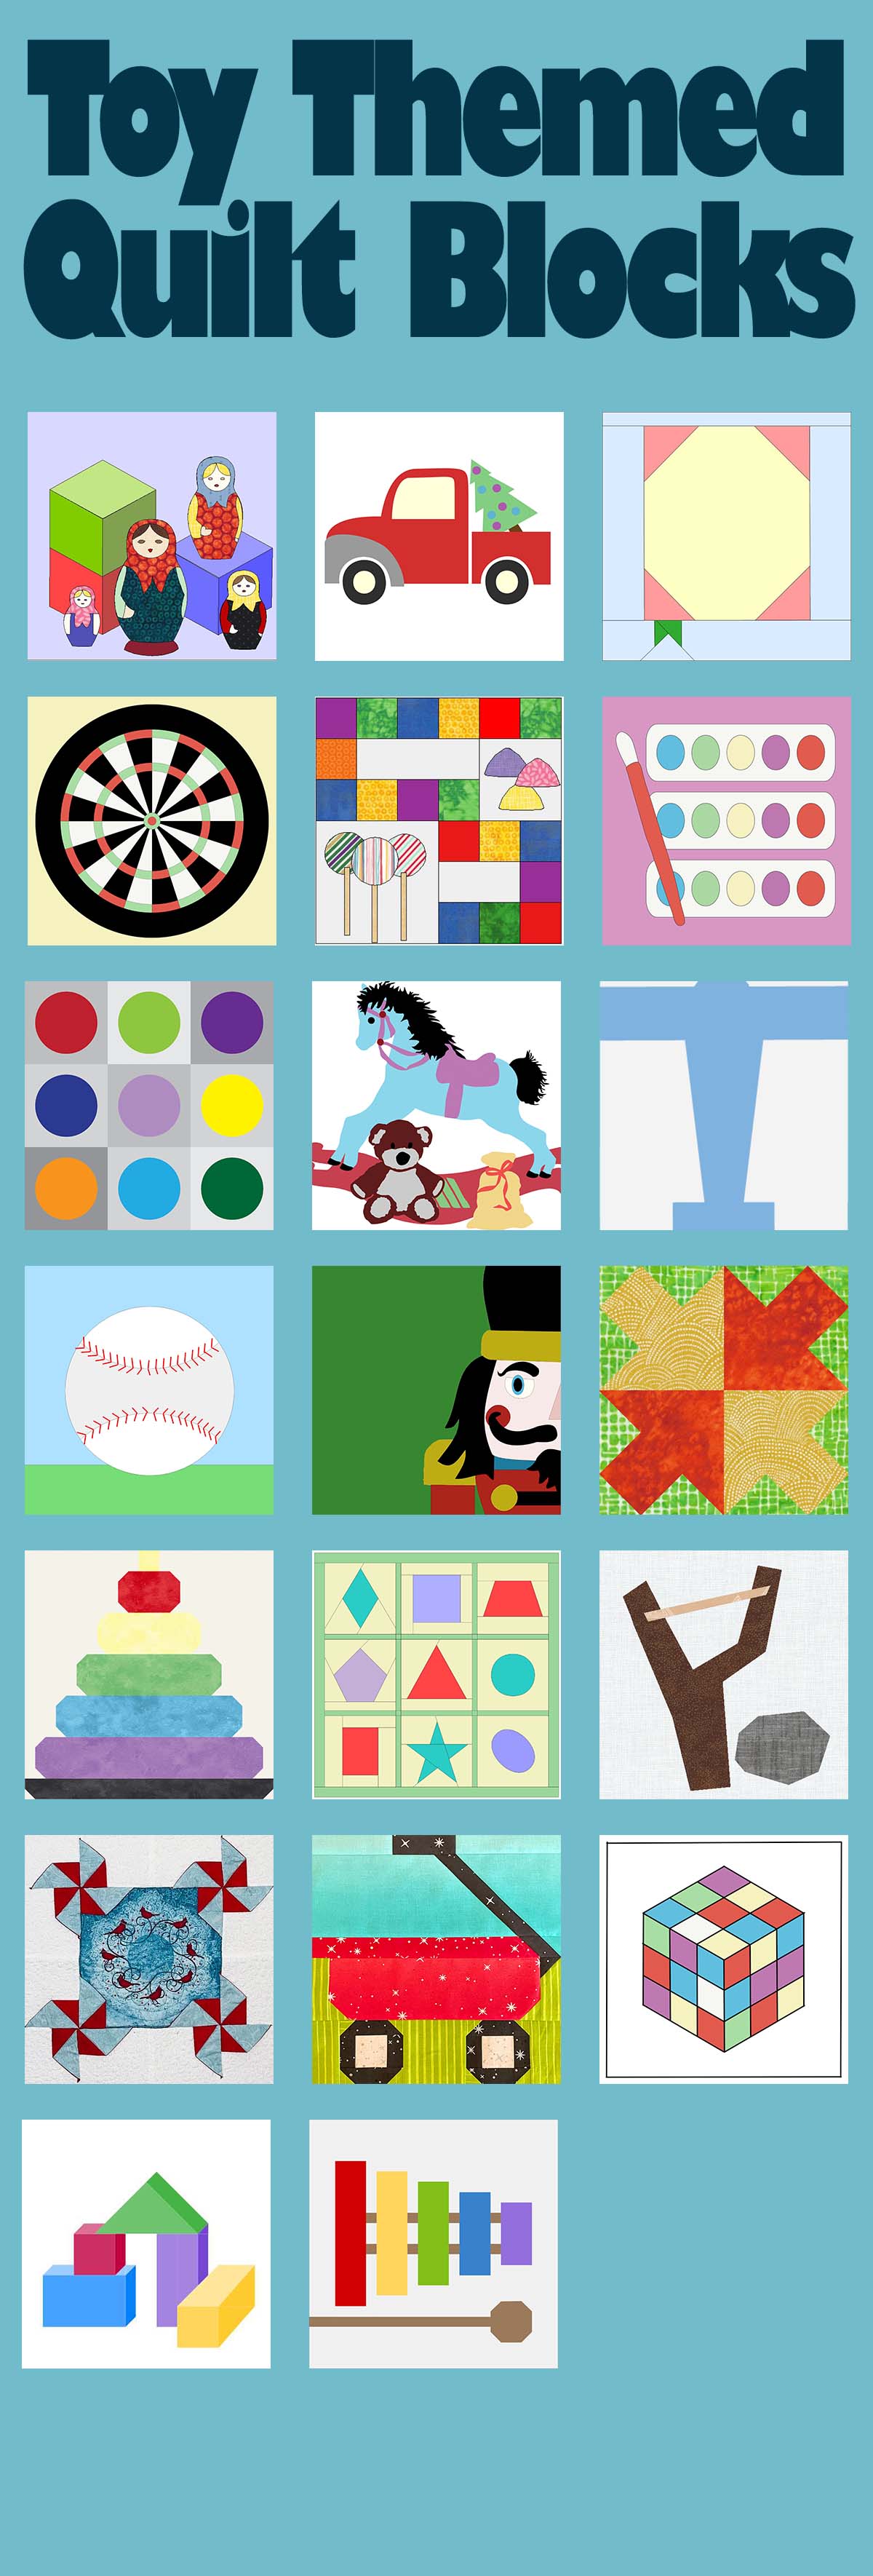 toy themed quilt blocks